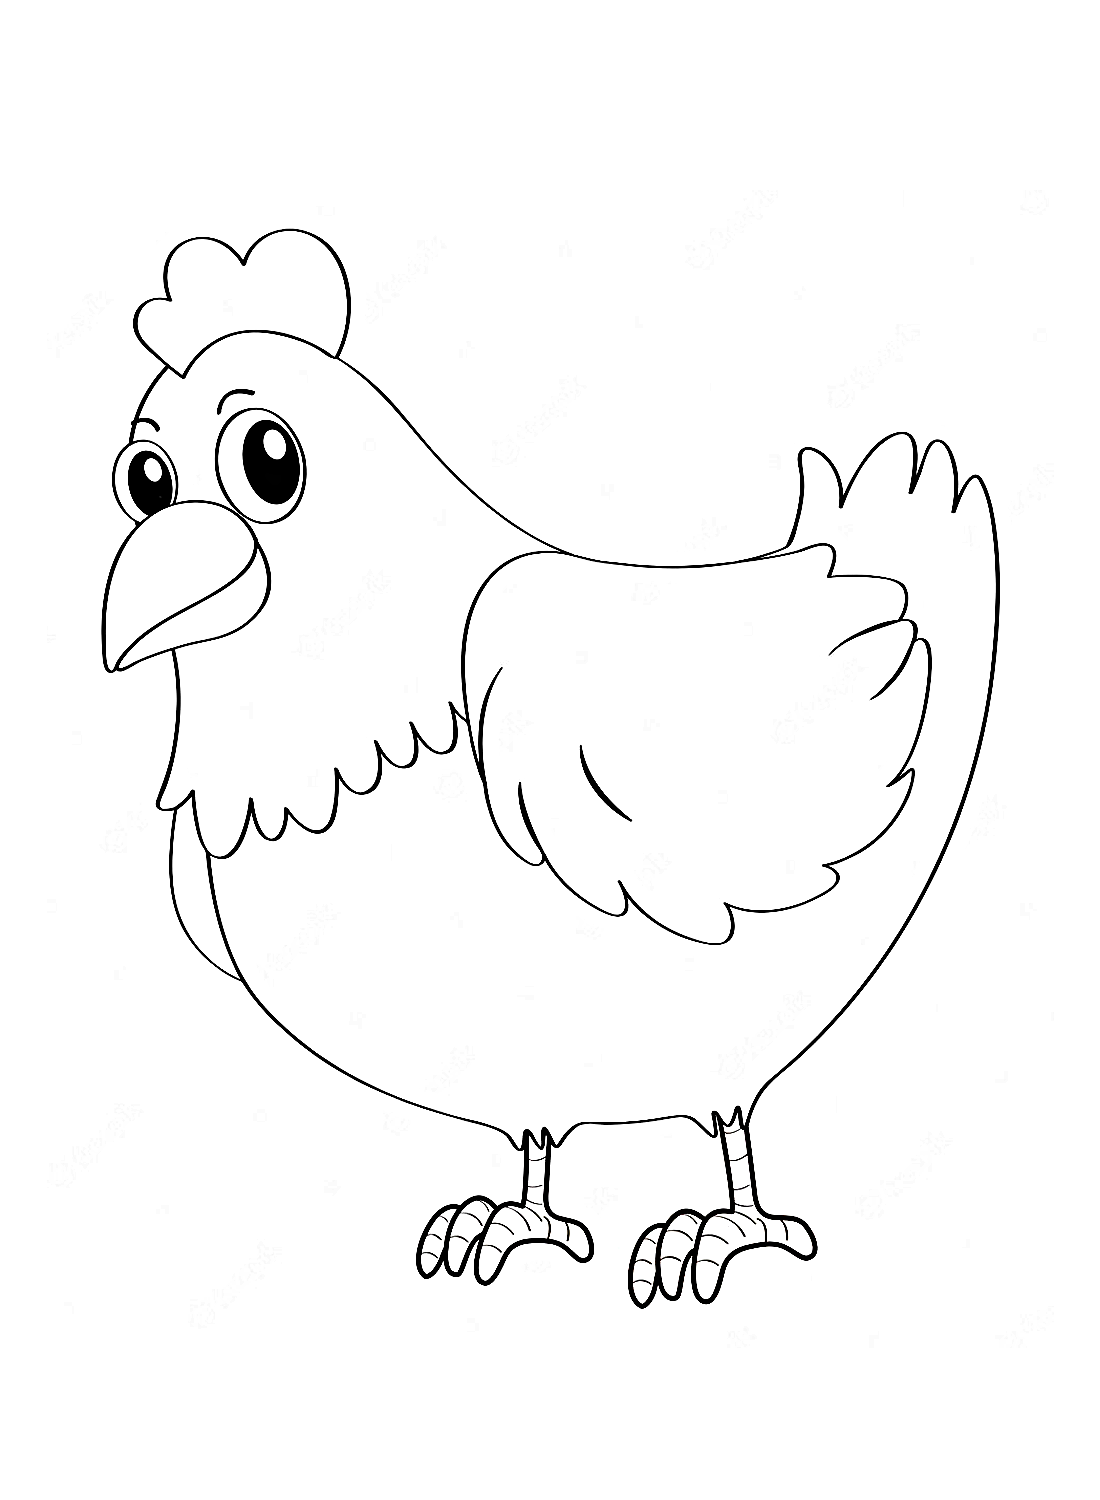 The cartoon hen Coloring Pages